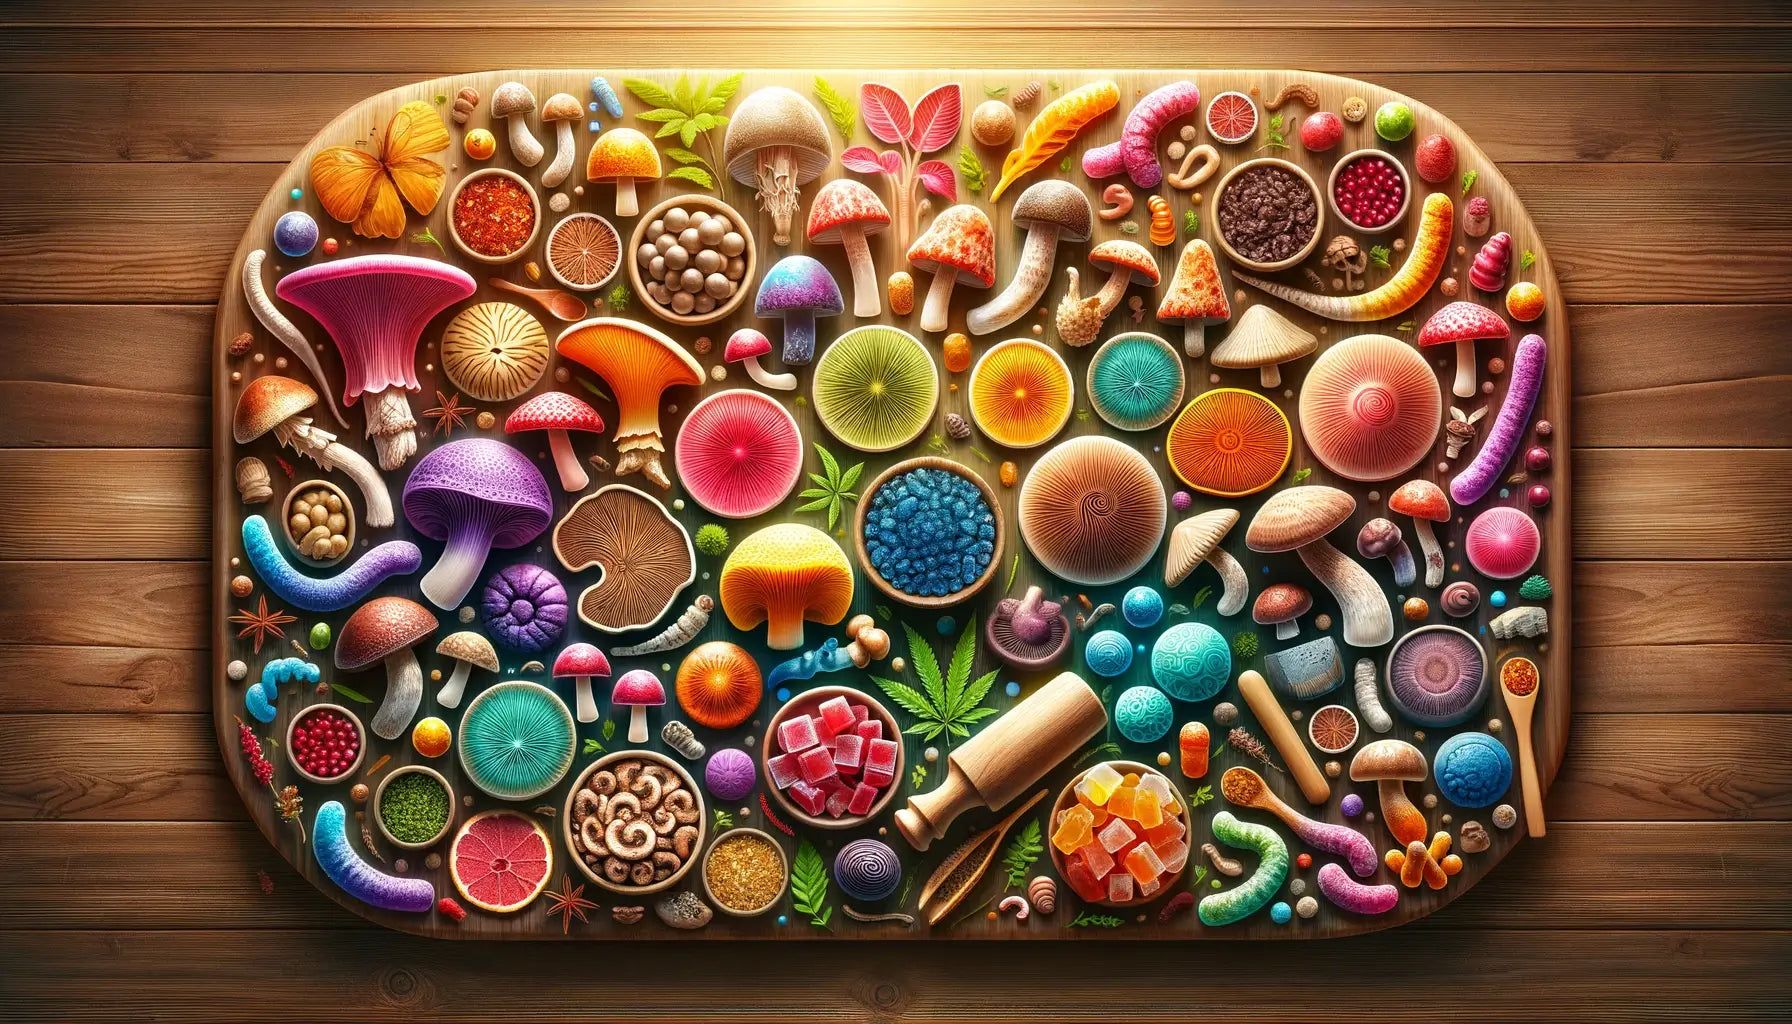 Features a broad, engaging scene where various colorful gummies, shaped like different medicinal mushrooms such as Reishi, Lion's Mane, and Chaga, are artfully arranged across the frame.